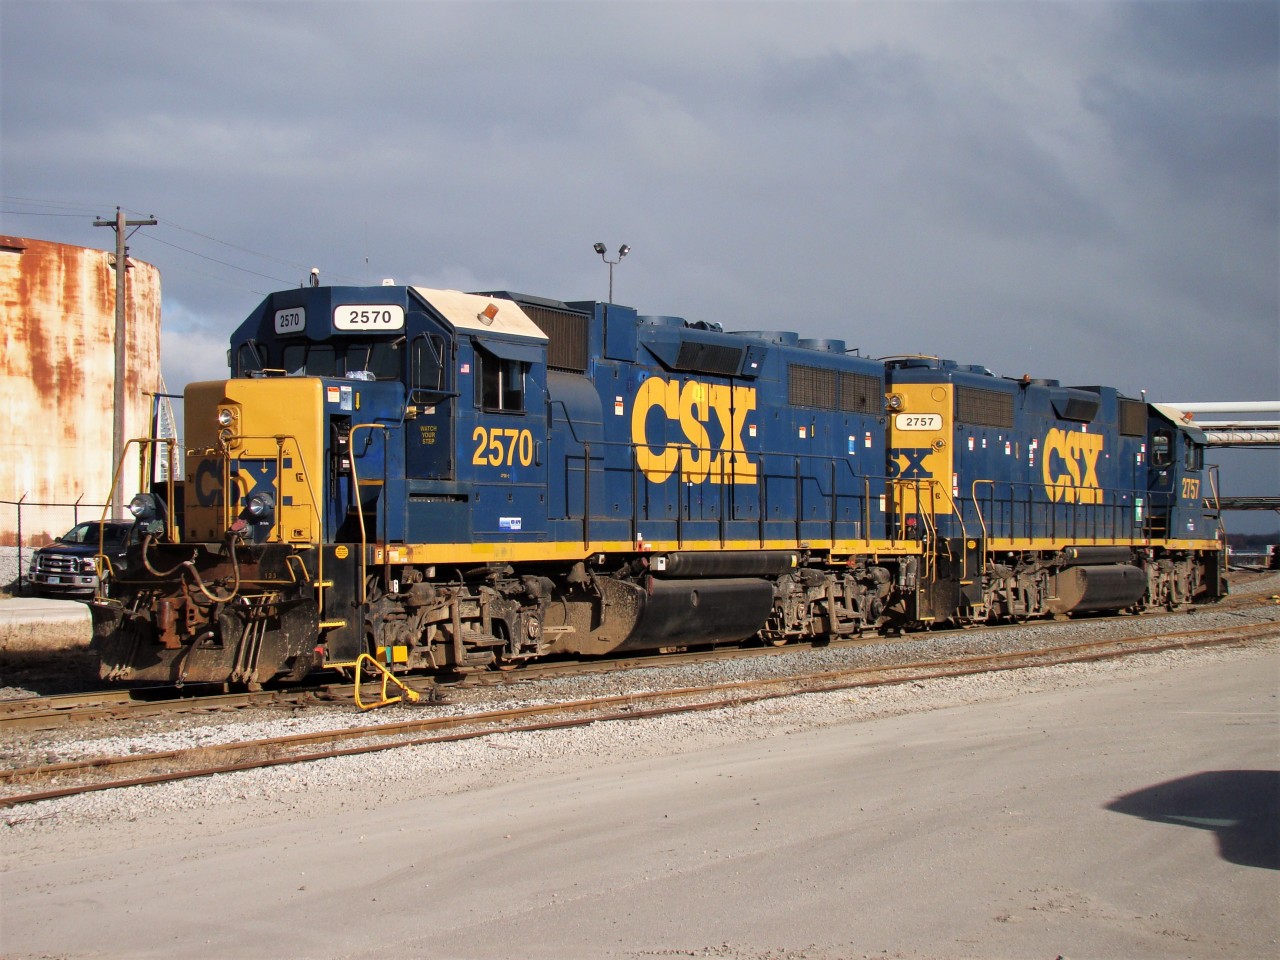 CSX power basks in the sun as the crew gathers inside the station, returning with a bag of gloves, before departing to switch Praxair and interchange with CN. The sun wouldn't last long however as a lake effect snow squall would soon blanket the area.